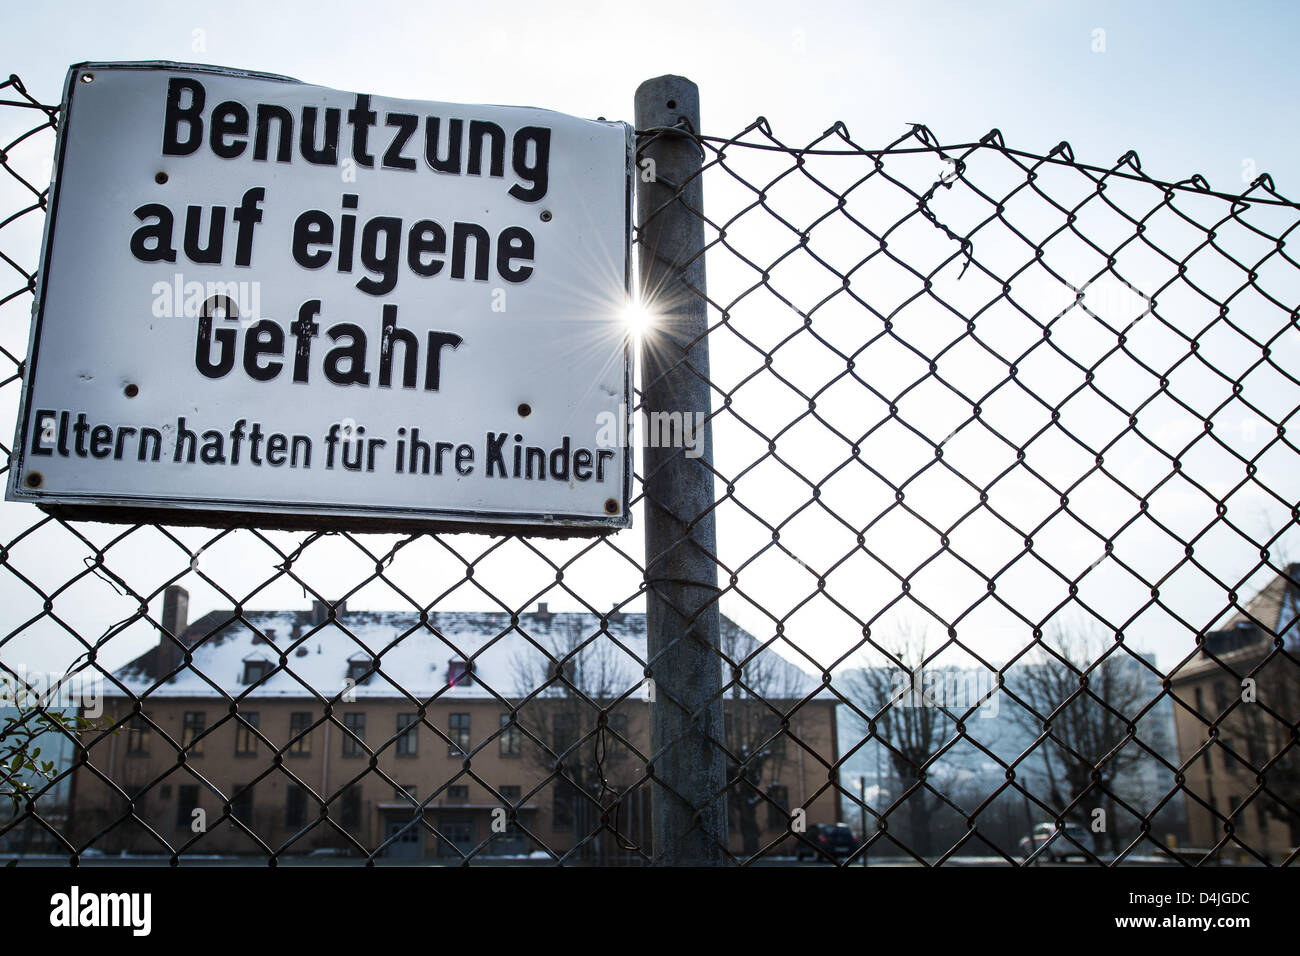 A sign saying 'Benutzung auf eigene Gefahr' ('use at your own risk') is pictured at the fence of a home for asylum seekers in Würzburg, Germany, 14 March 2013. In March 2012 ten Iranian asylum seekers went on a hunger strike. The protest turned into a nationwide movement. Photo: David Ebener Stock Photo